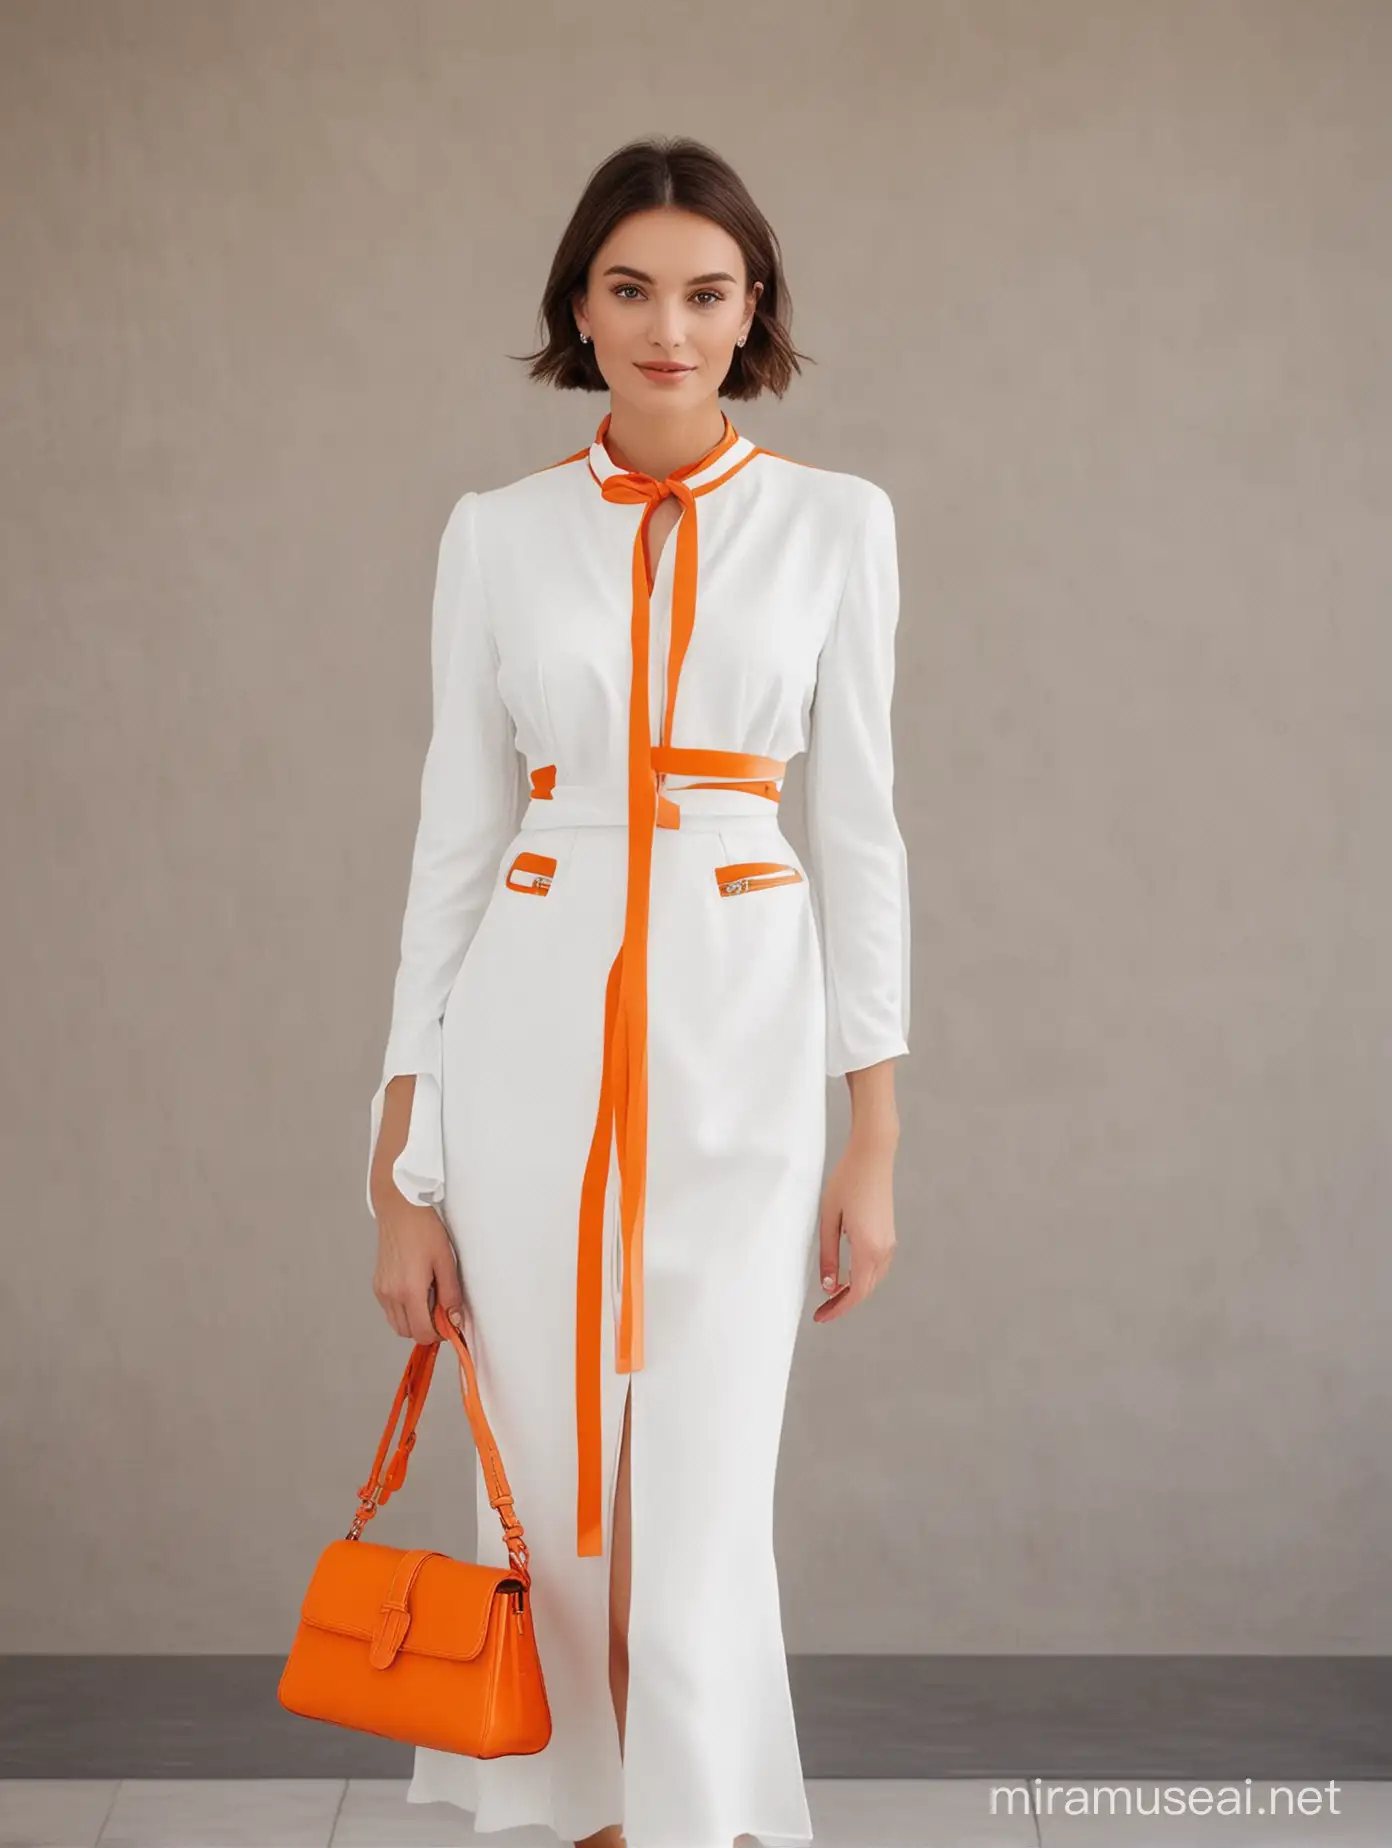 Lady in white and orange wearing
